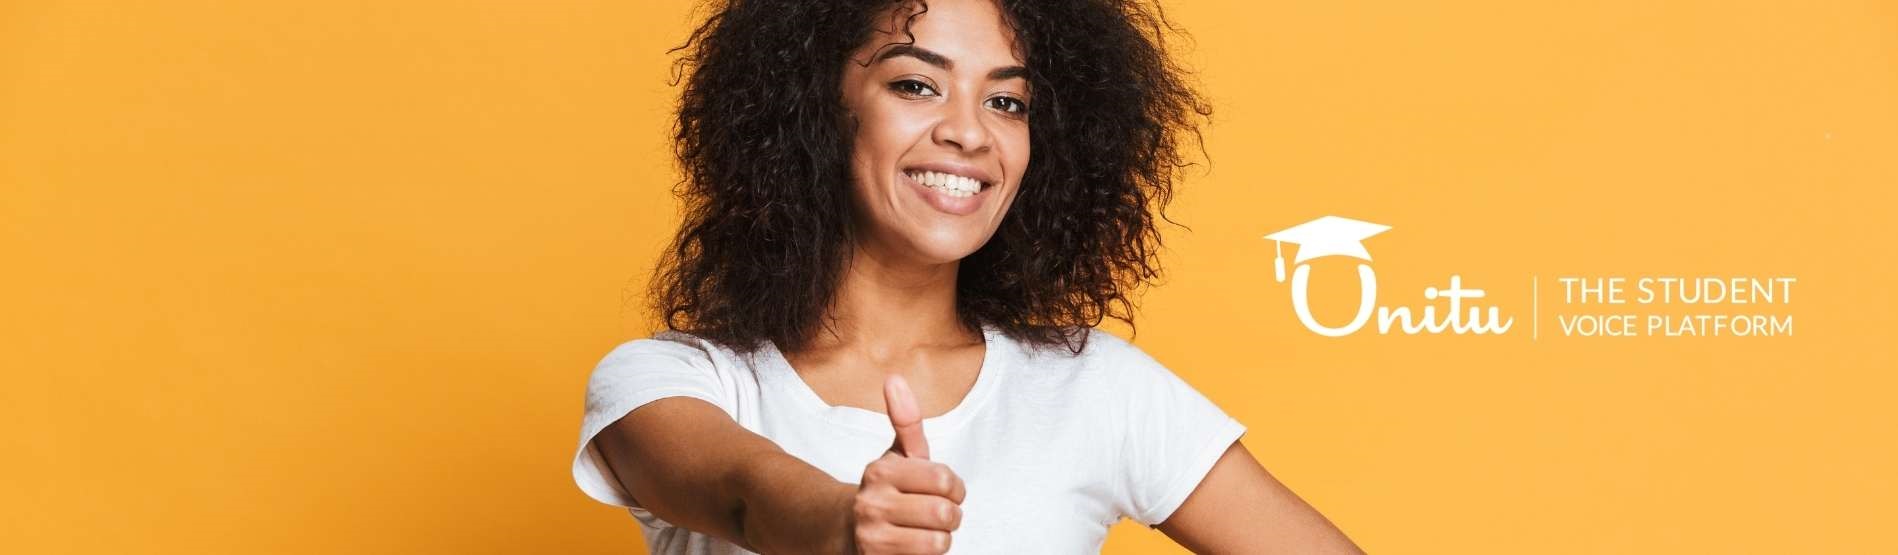 Girl with curly brown hair giving a 'thumbs up'. The background is orange and the Unitu logo is to the right of the image.